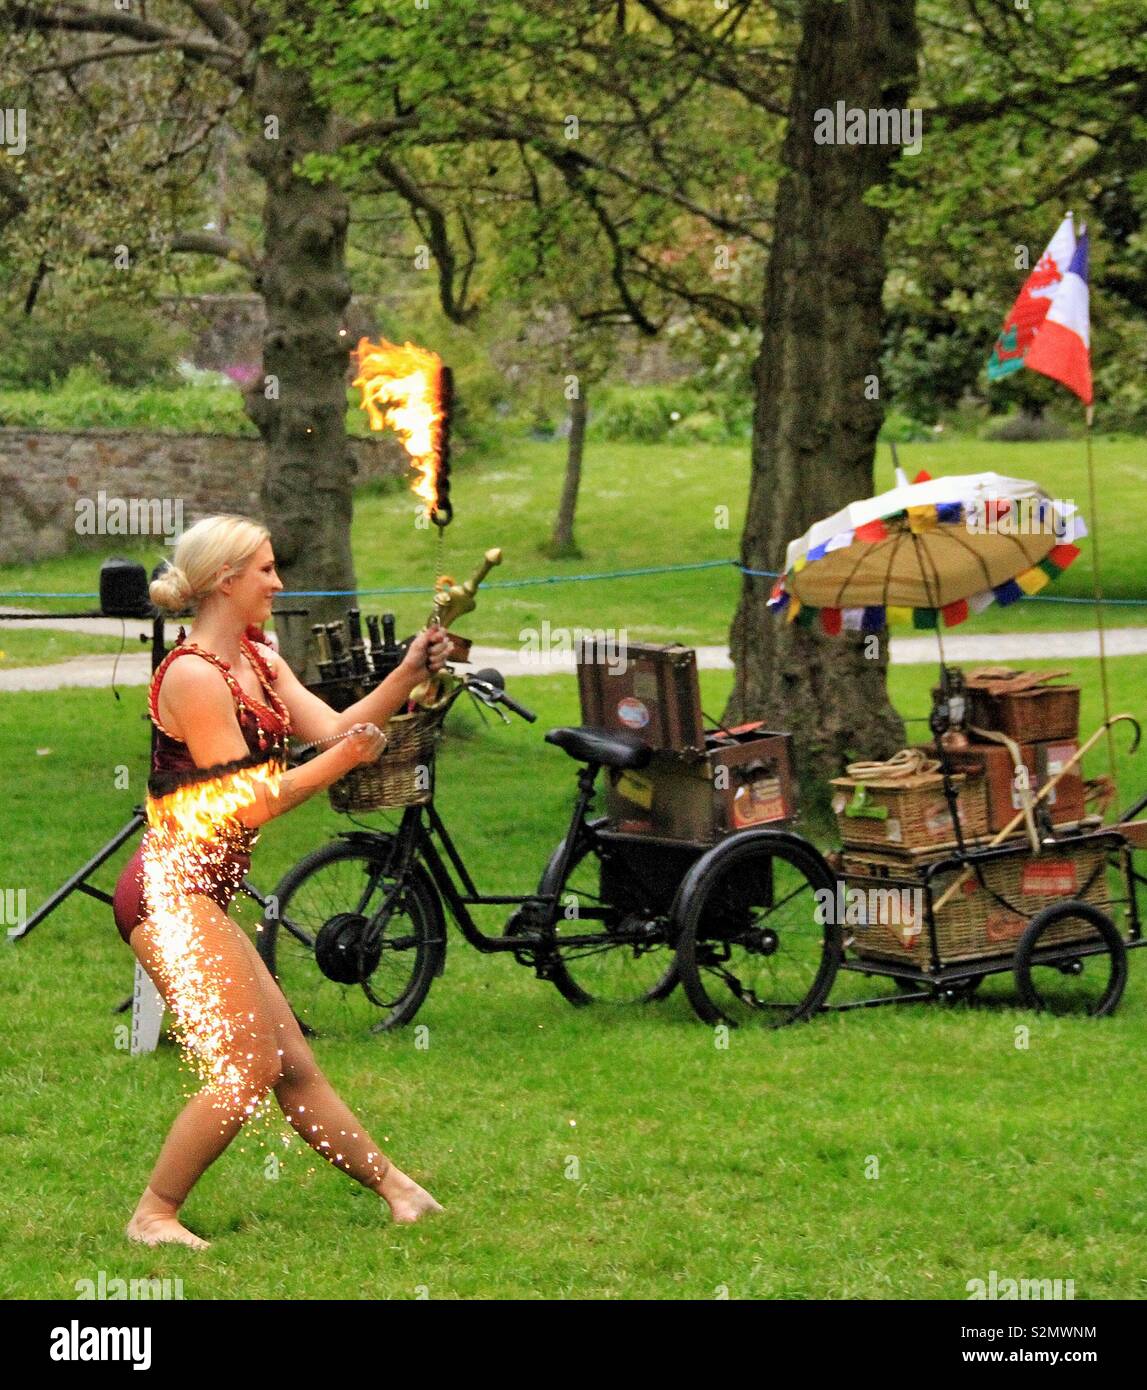 Fire performer at country park Foto Stock